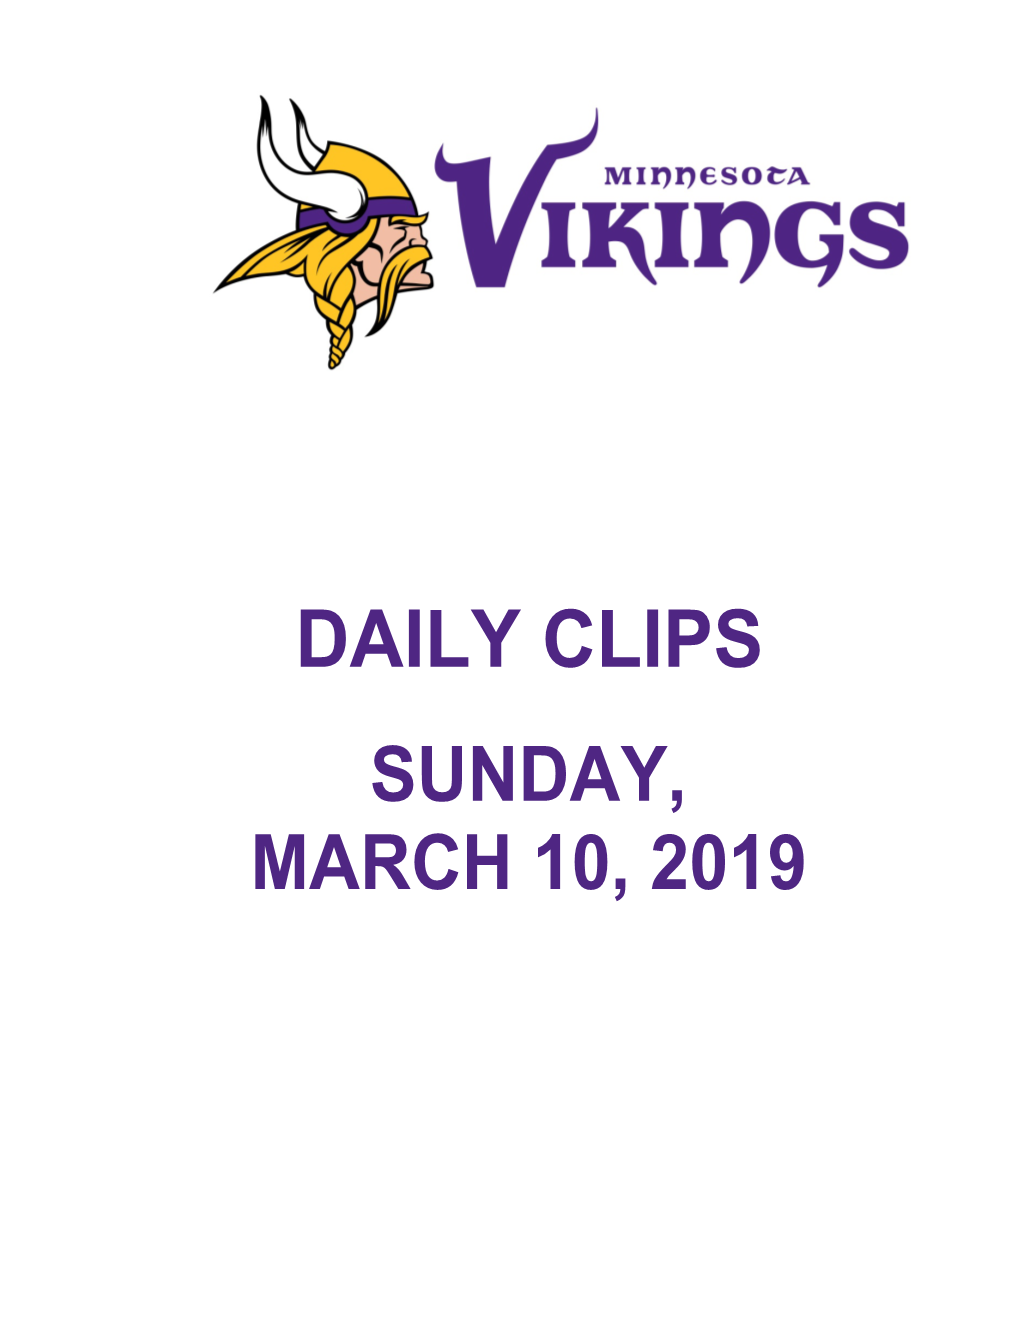 Daily Clips Sunday, March 10, 2019